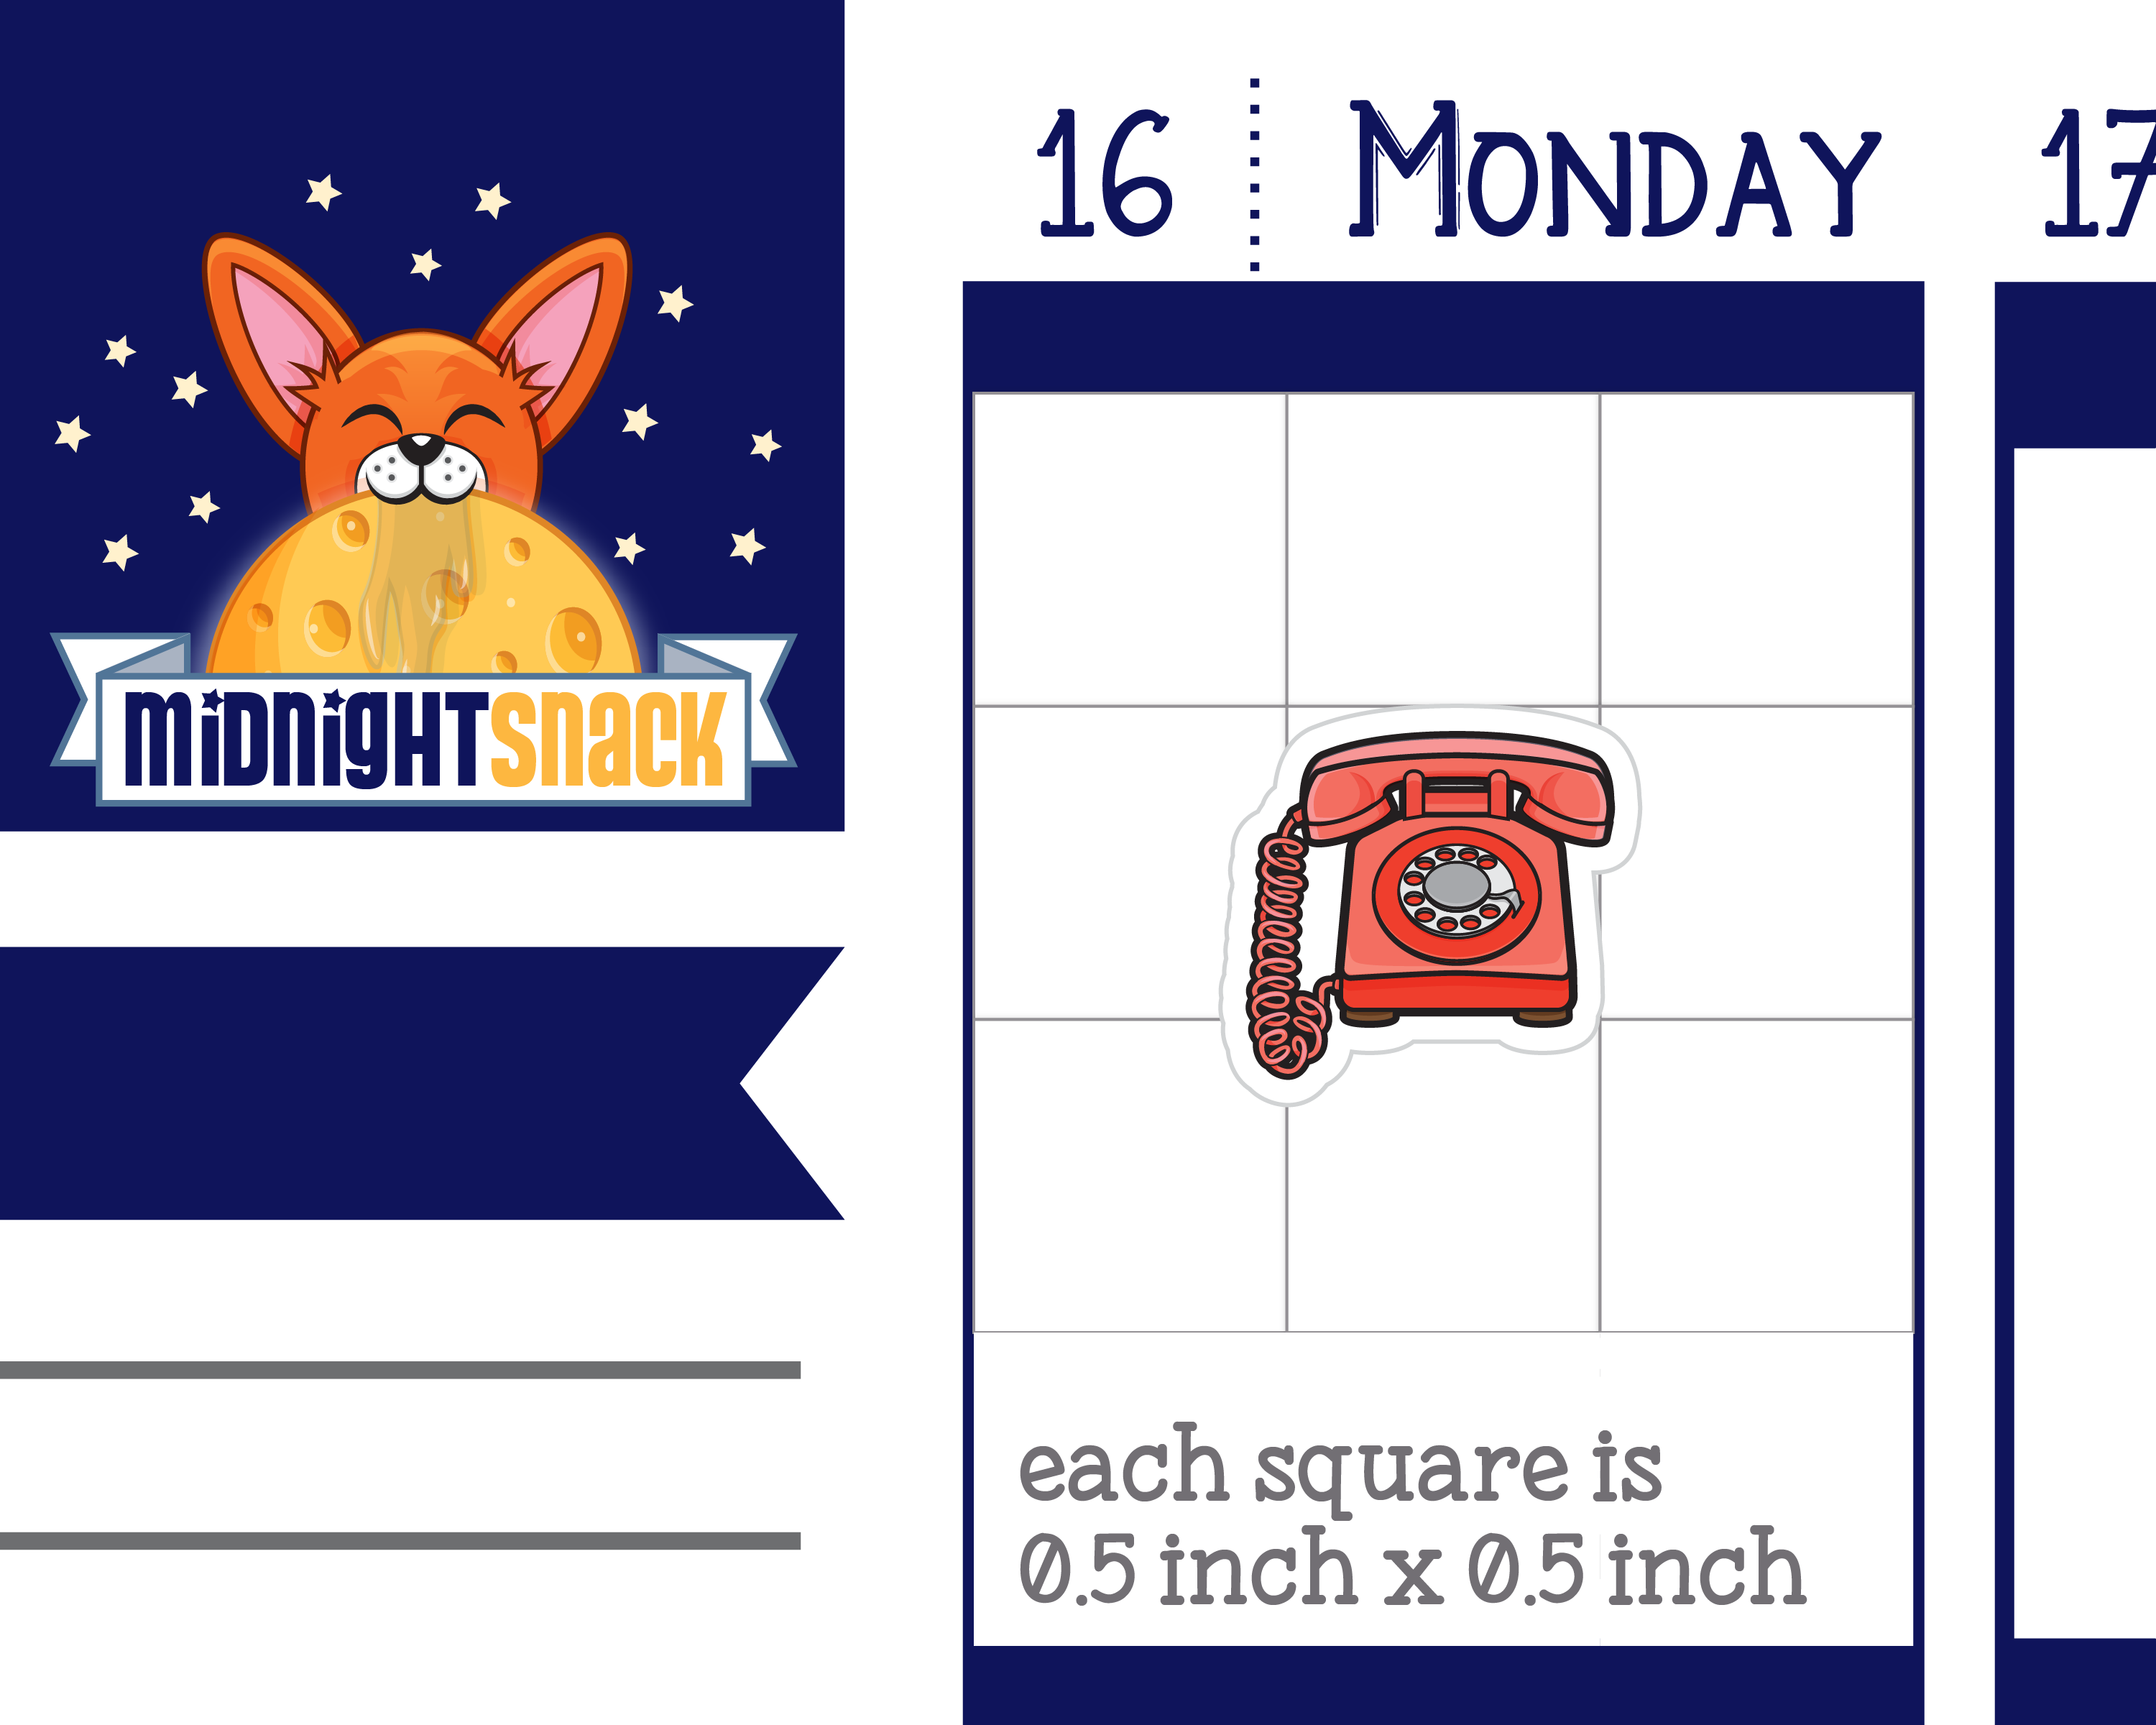 Rotary Telephone Icon:  Phone Call Reminder Planner Stickers Midnight Snack Planner